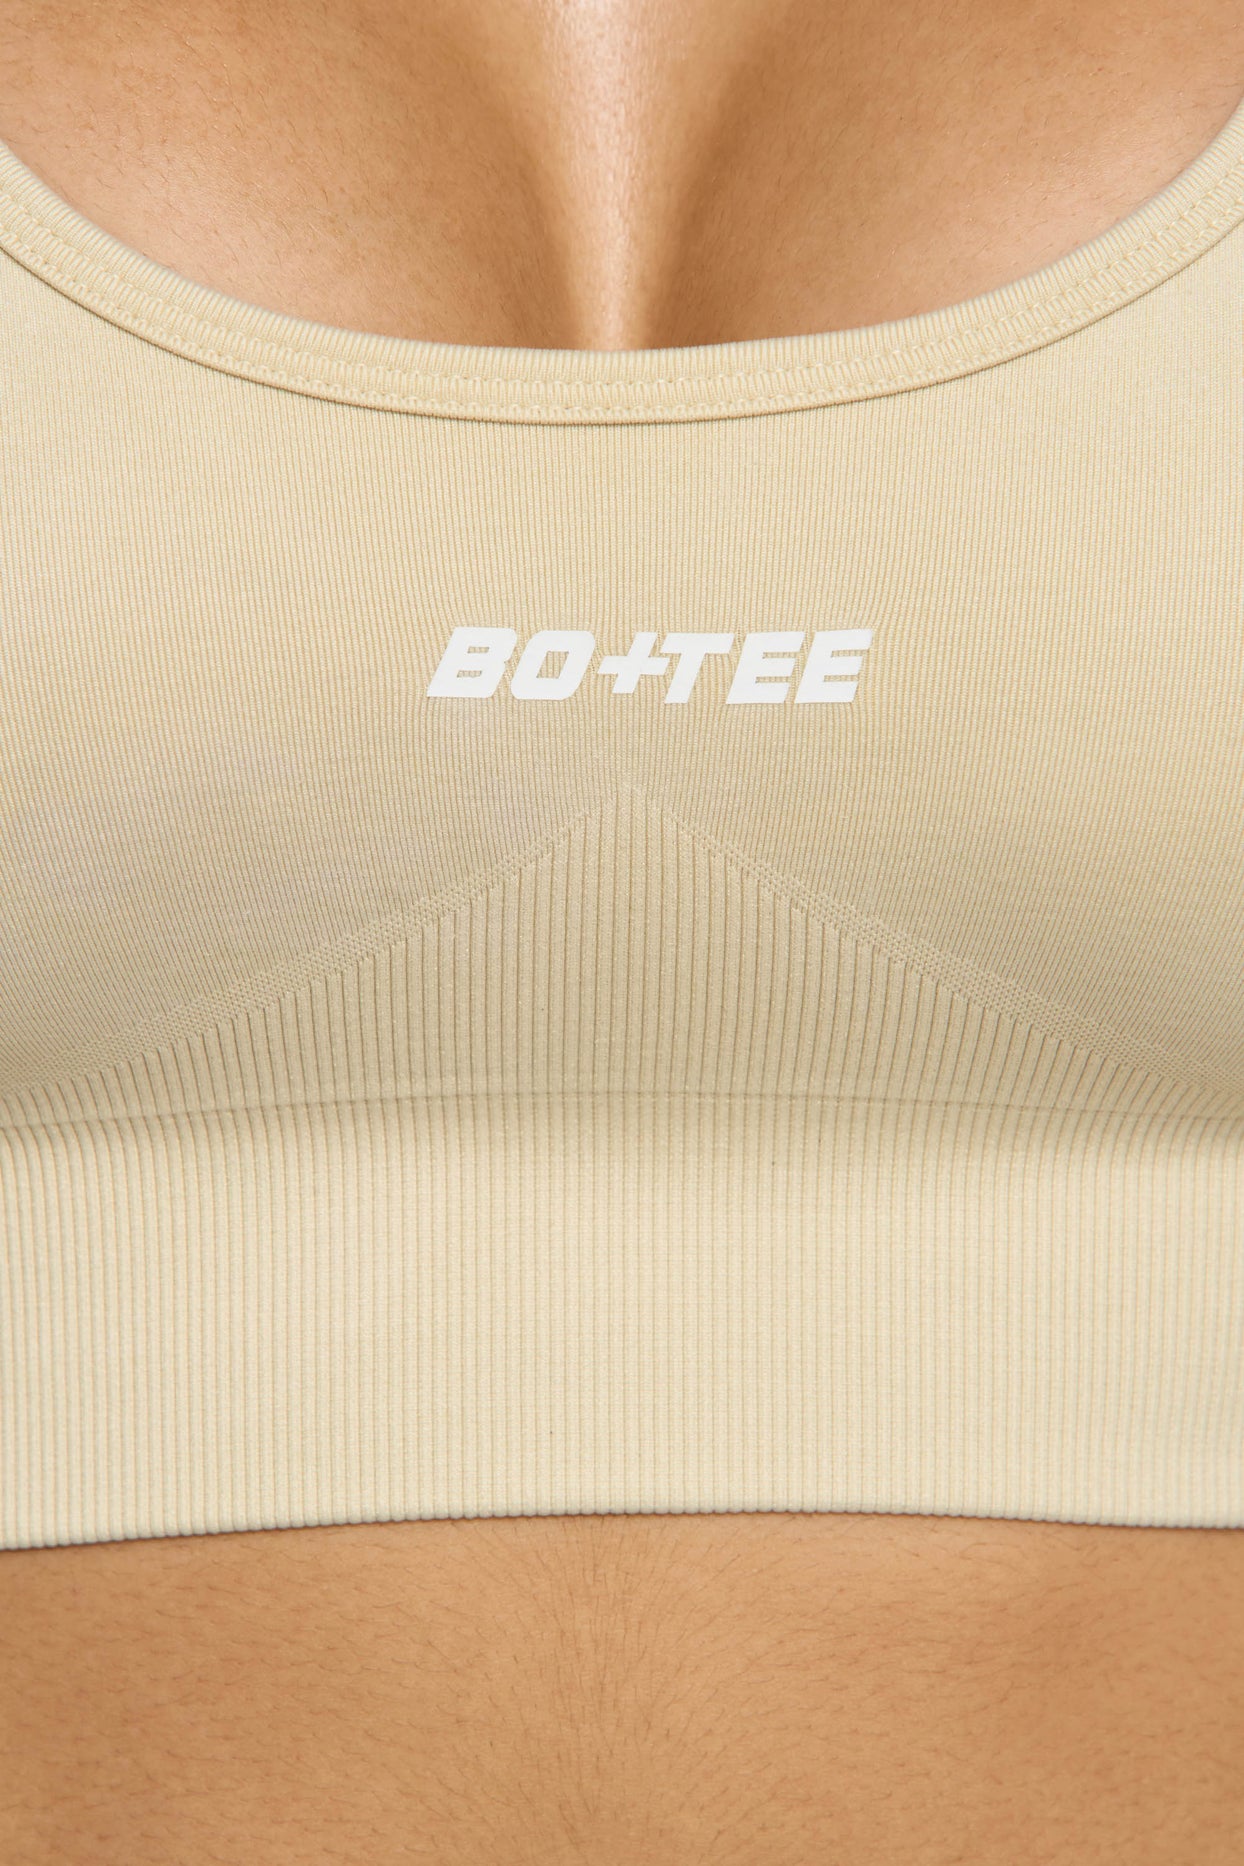 Clearance Final Sale Beige Athletic Round Neck Racer Back Sports Bra –  Organic Solutions Canada